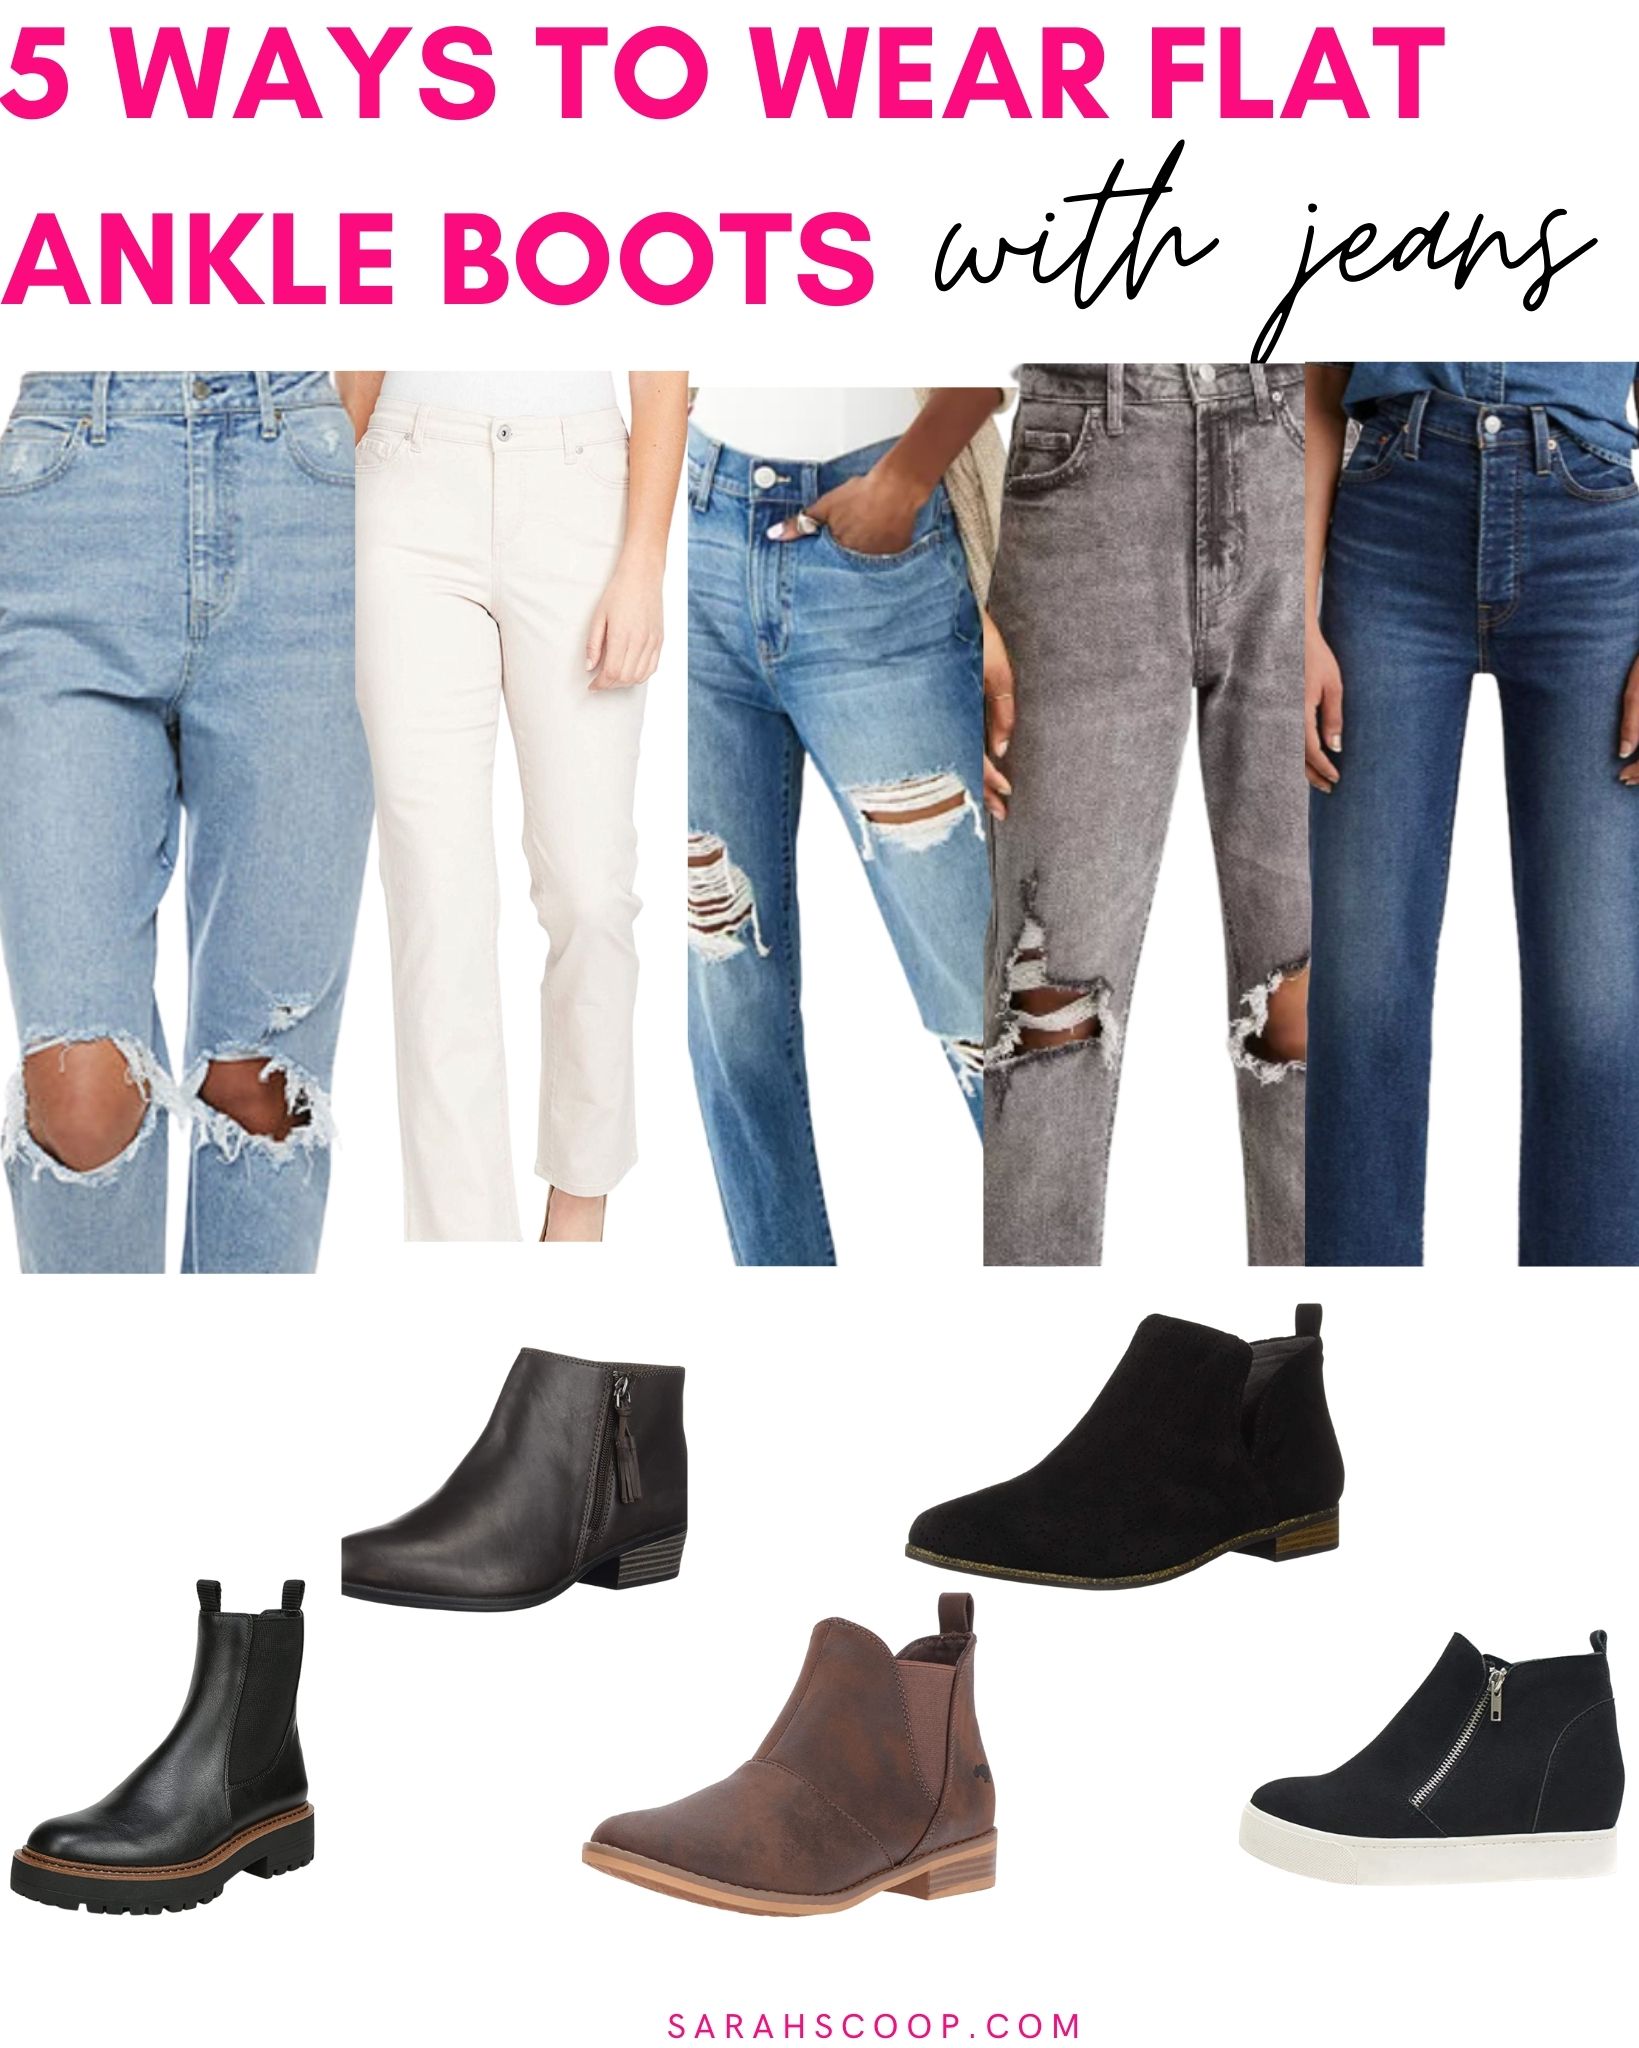 5 Ways To Wear Flat Ankle Boots With Jeans  Sarah Scoop